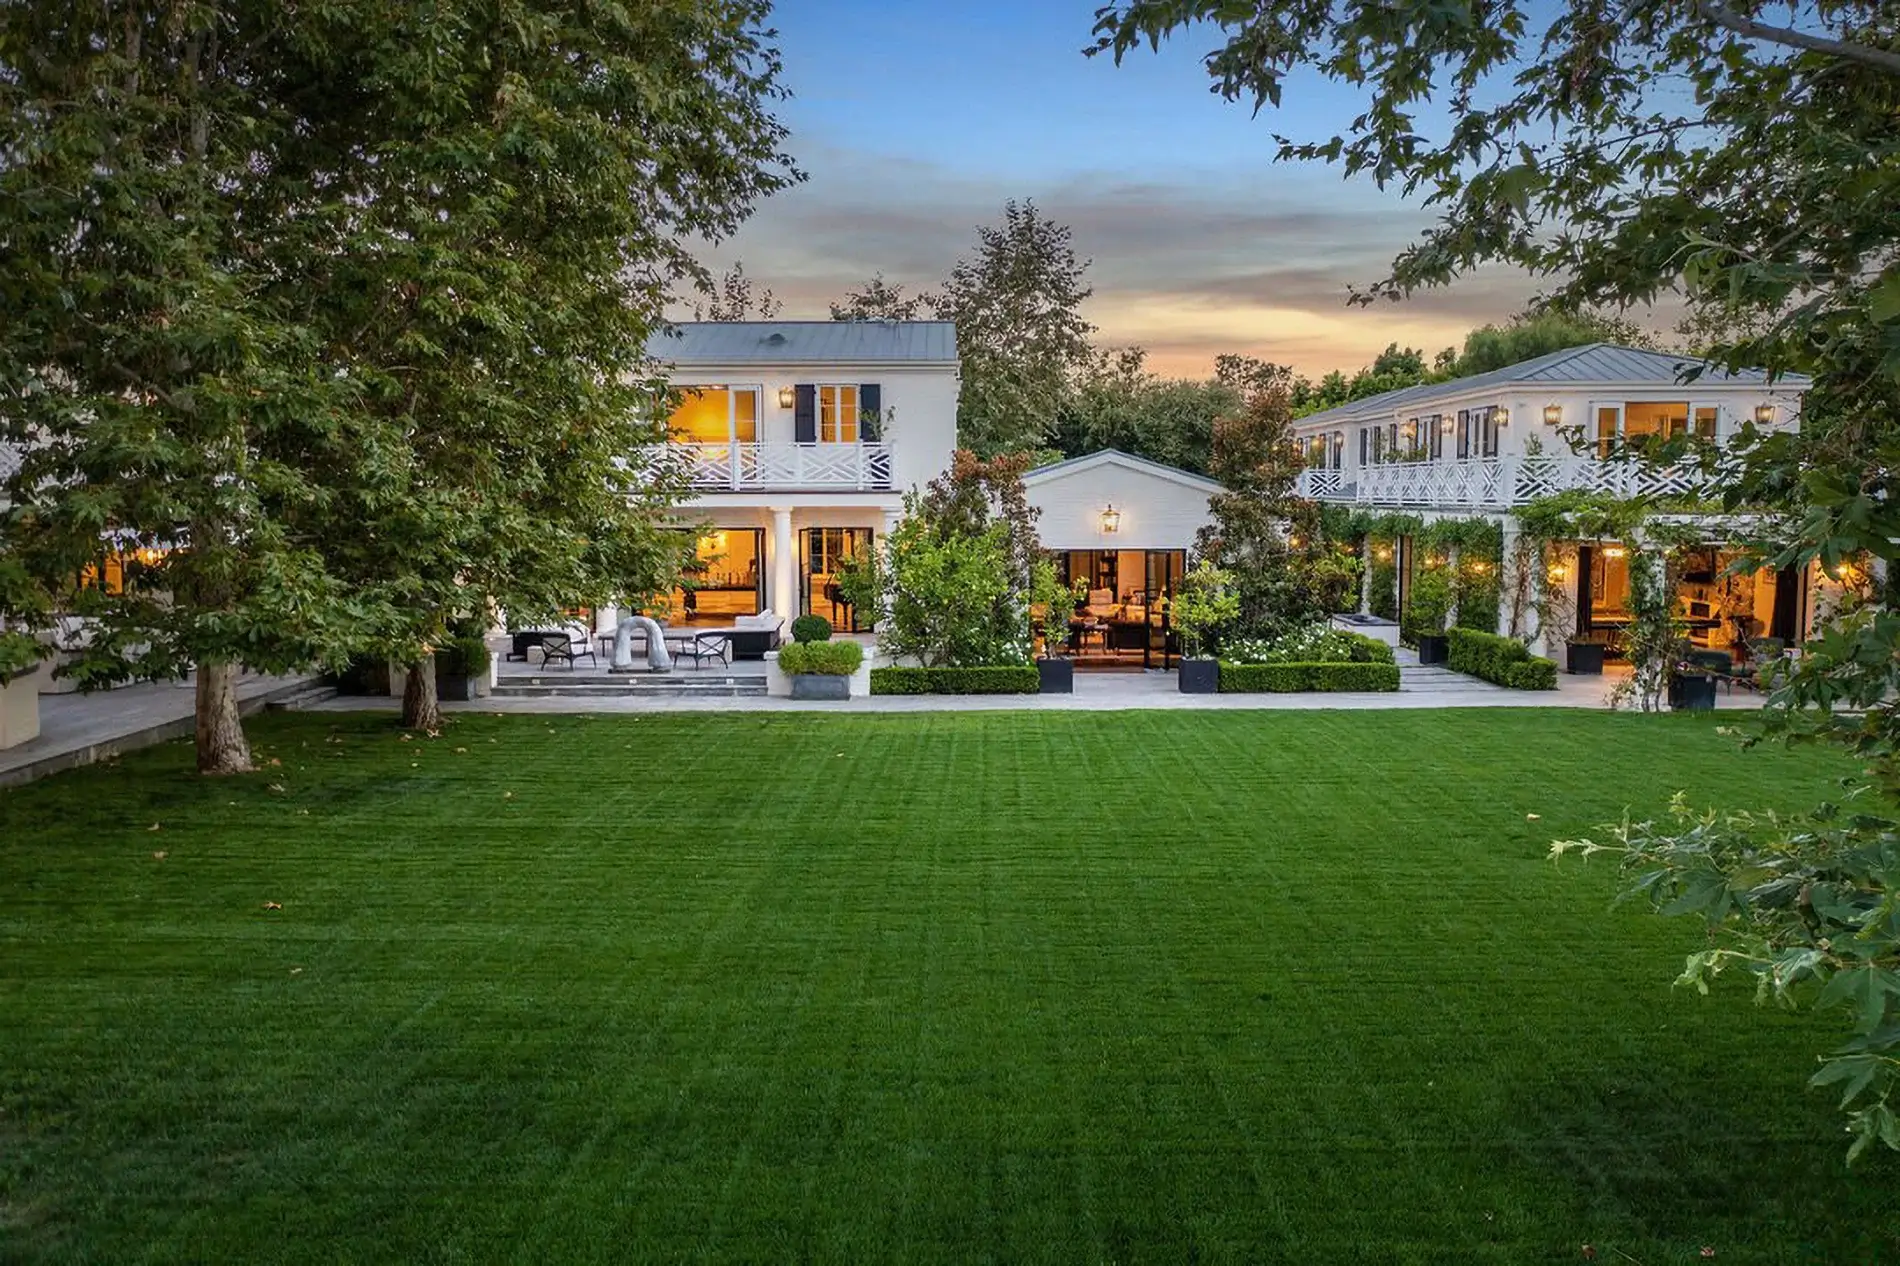 12-Bedroom Single Family Home rented by Ben Affleck and Jennifer Lopez, Beverly Hills, CA, USA, $85,000,000